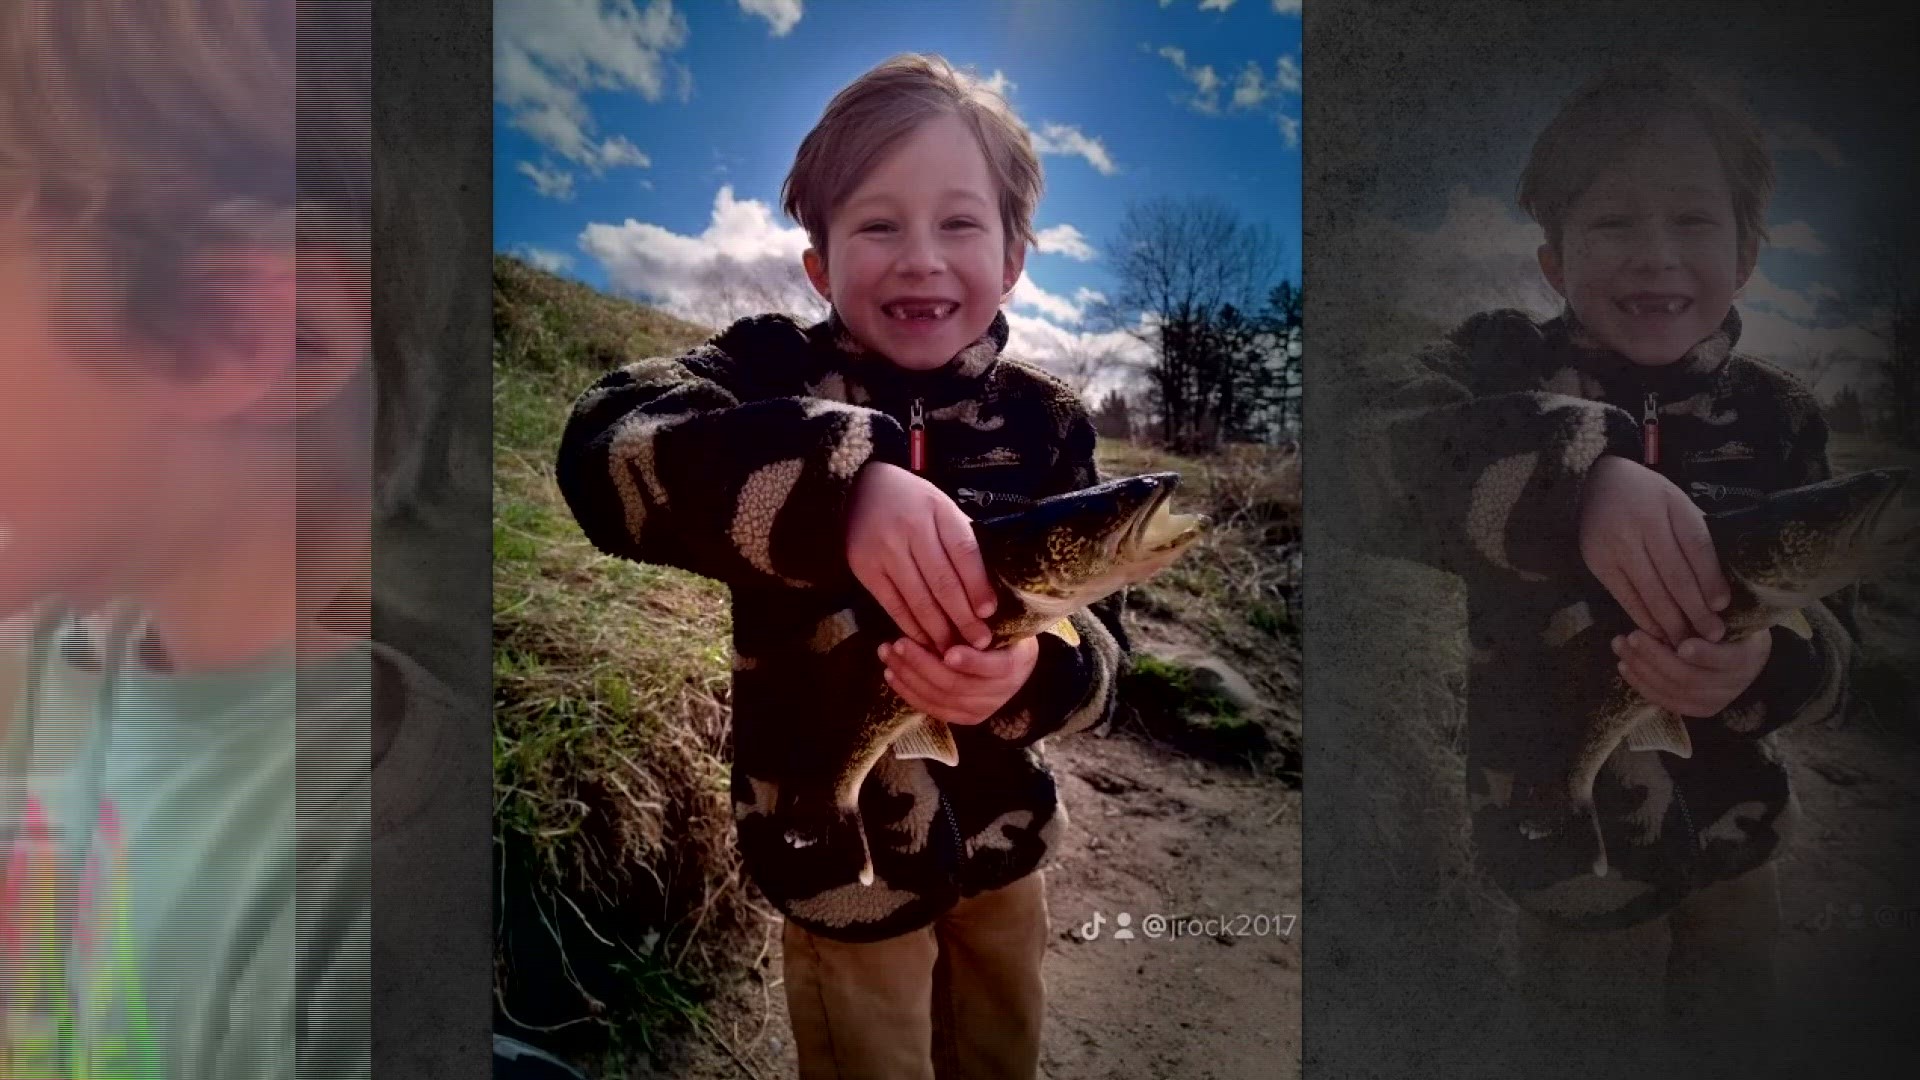 Hundreds of emails, texts and case reports obtained by KARE 11 reveal child protection’s myriad of failures before 6-year-old Eli Hart was murdered by his mother.